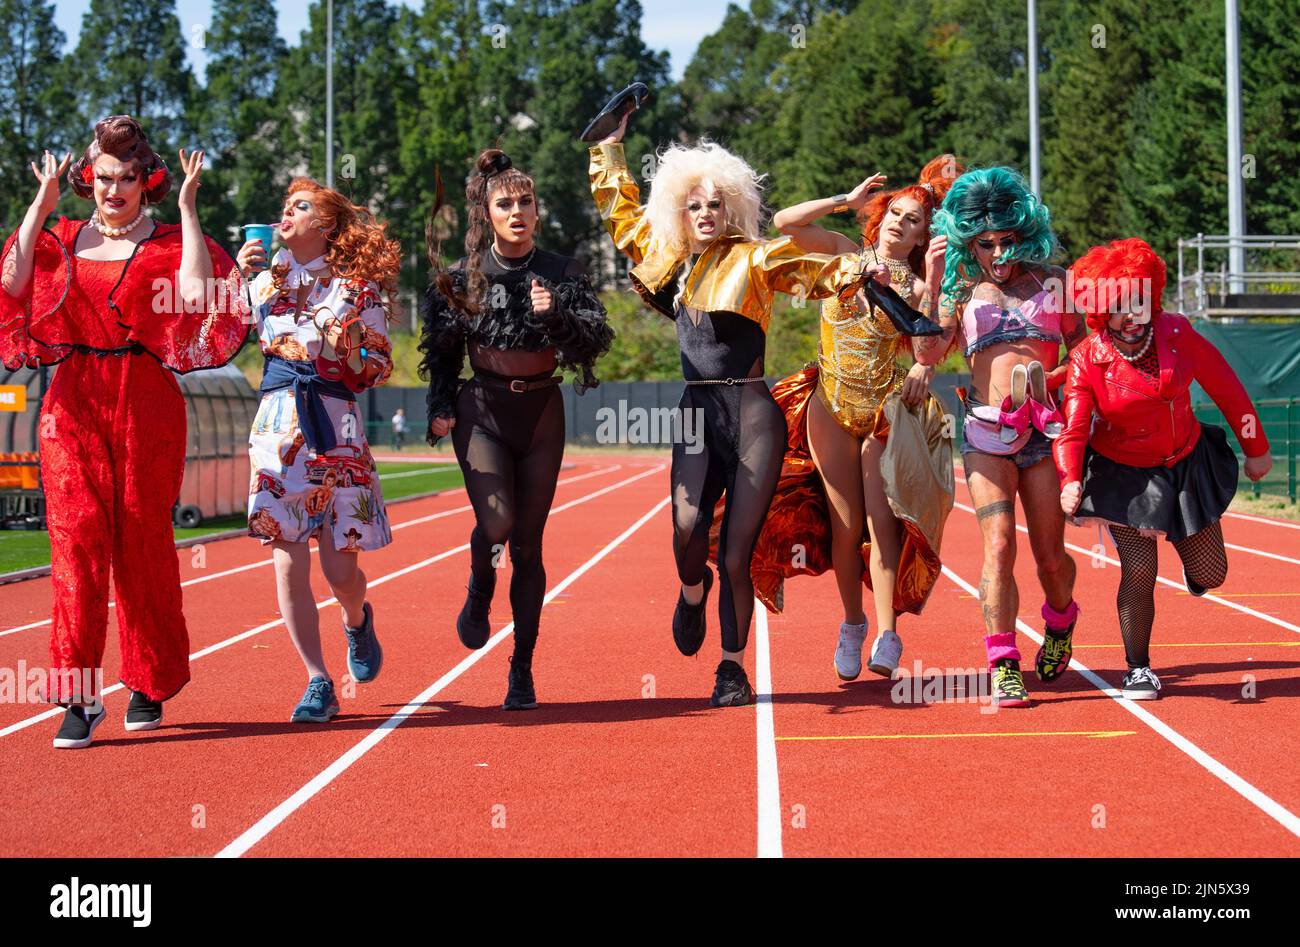 Edinburgh, Scotland, UK. 9th August 2022.  Drag queens from several shows performing as part of the Edinburgh Fringe 2022 Toake part in a Drag Race on the running track at the redeveloped Meadowbank stadium in Edinburgh today. From left;  Kate Butch, Dixie Longate, Nastia, Enter Serenity, Belle Du Ball,  Captain Kidd, Crudi Dench. Iain Masterton/Alamy Live News Stock Photo